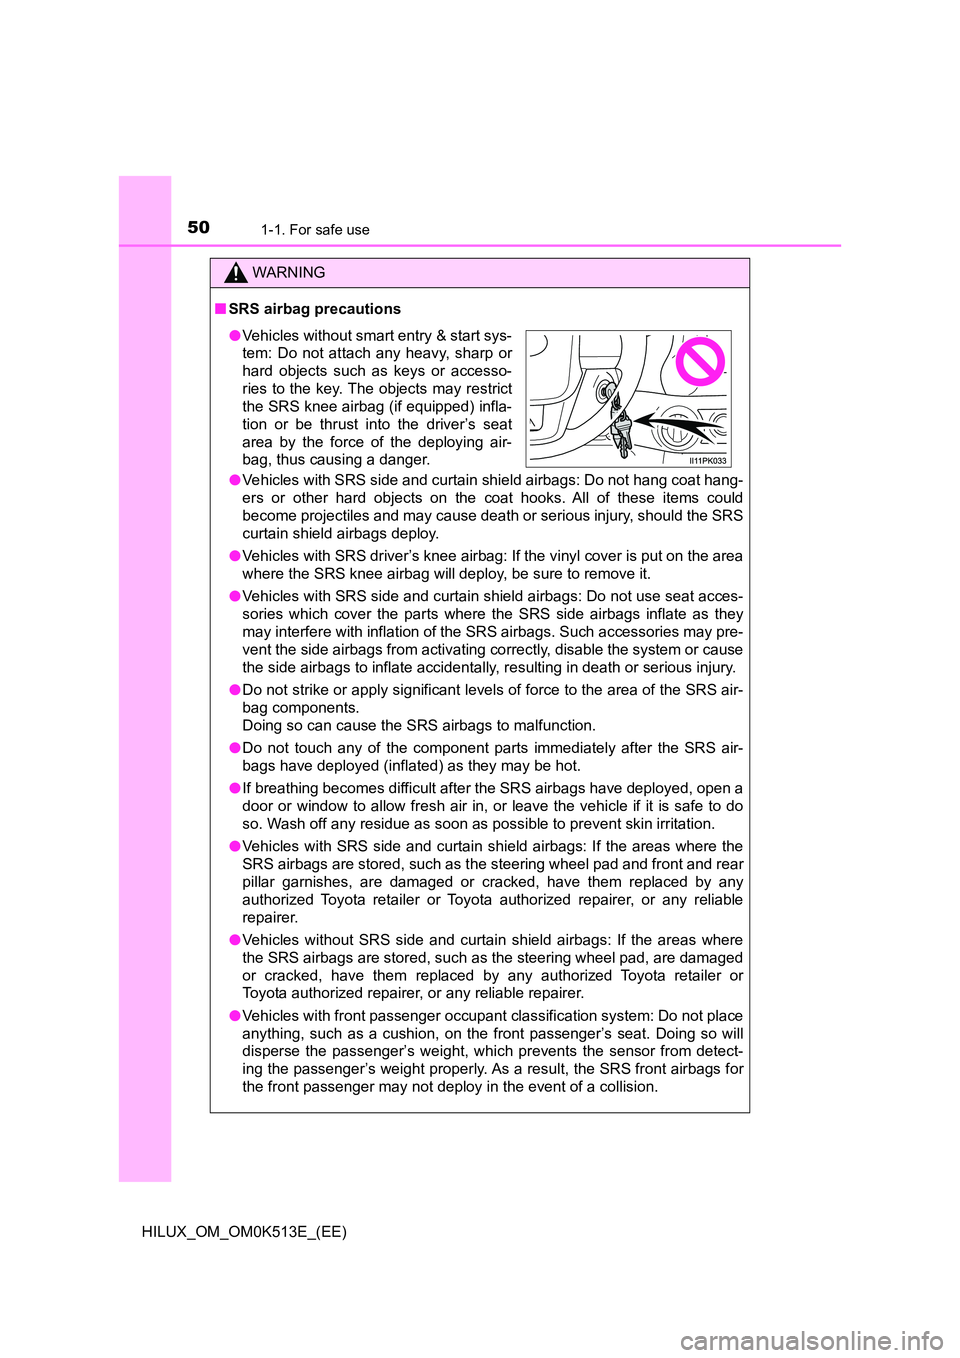 TOYOTA HILUX 2022  Owners Manual 501-1. For safe use
HILUX_OM_OM0K513E_(EE)
WARNING
�QSRS airbag precautions 
�O Vehicles with SRS side and curtain shield airbags: Do not hang coat hang- 
ers or other hard objects on the coat hooks. 